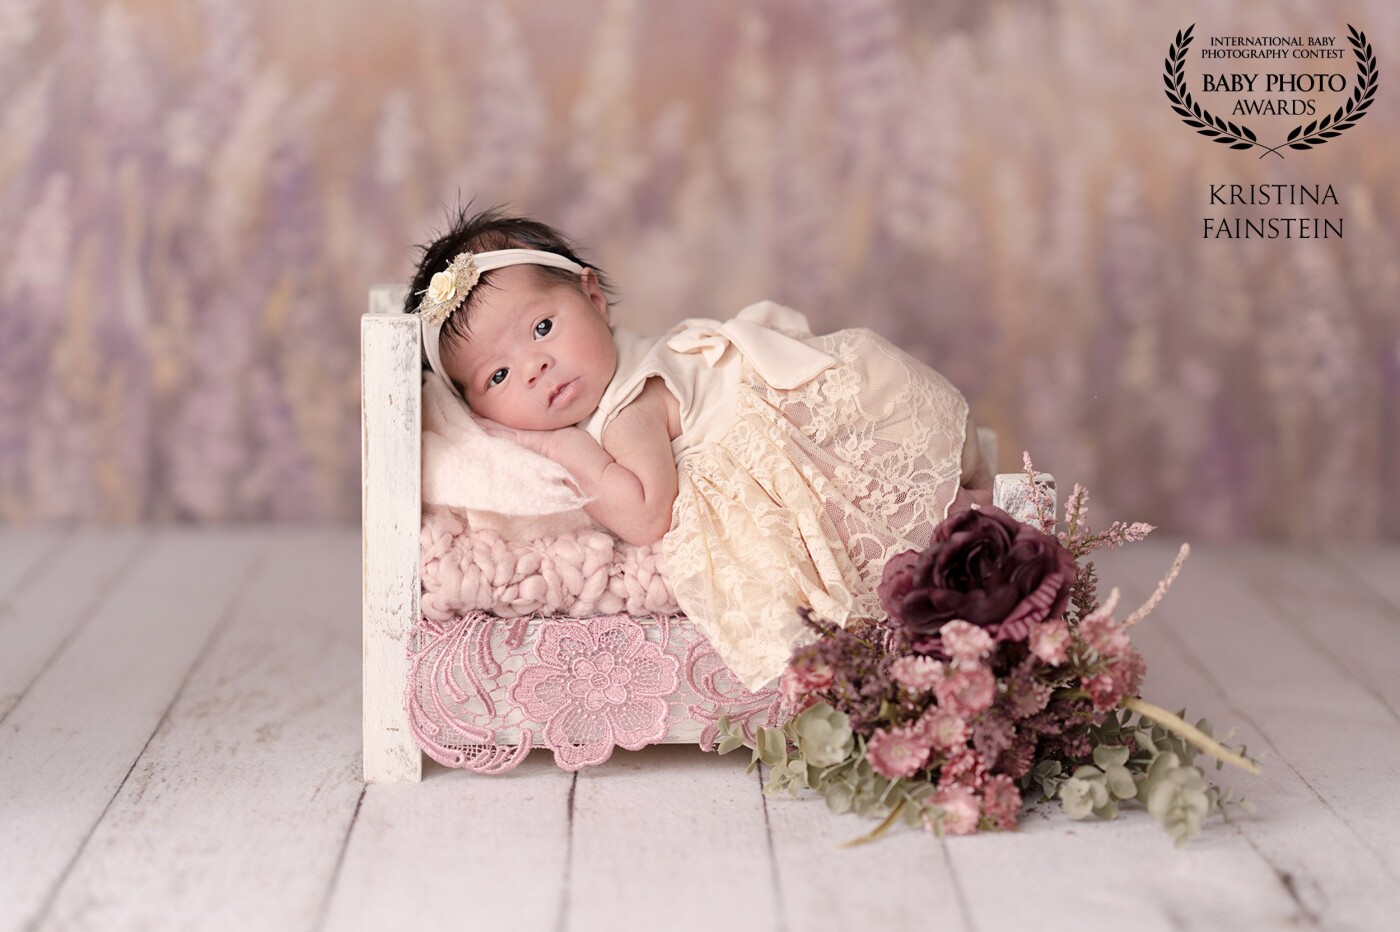 A tiny princess Sofia visited our studio when she was only 5 days old. She was so peaceful and joyful like she understood everything. A charm flew around this marvelous baby,  angels were clapping hands and the moon was dancing with stars. Each session is a fairytale we live and have to show to the world. 